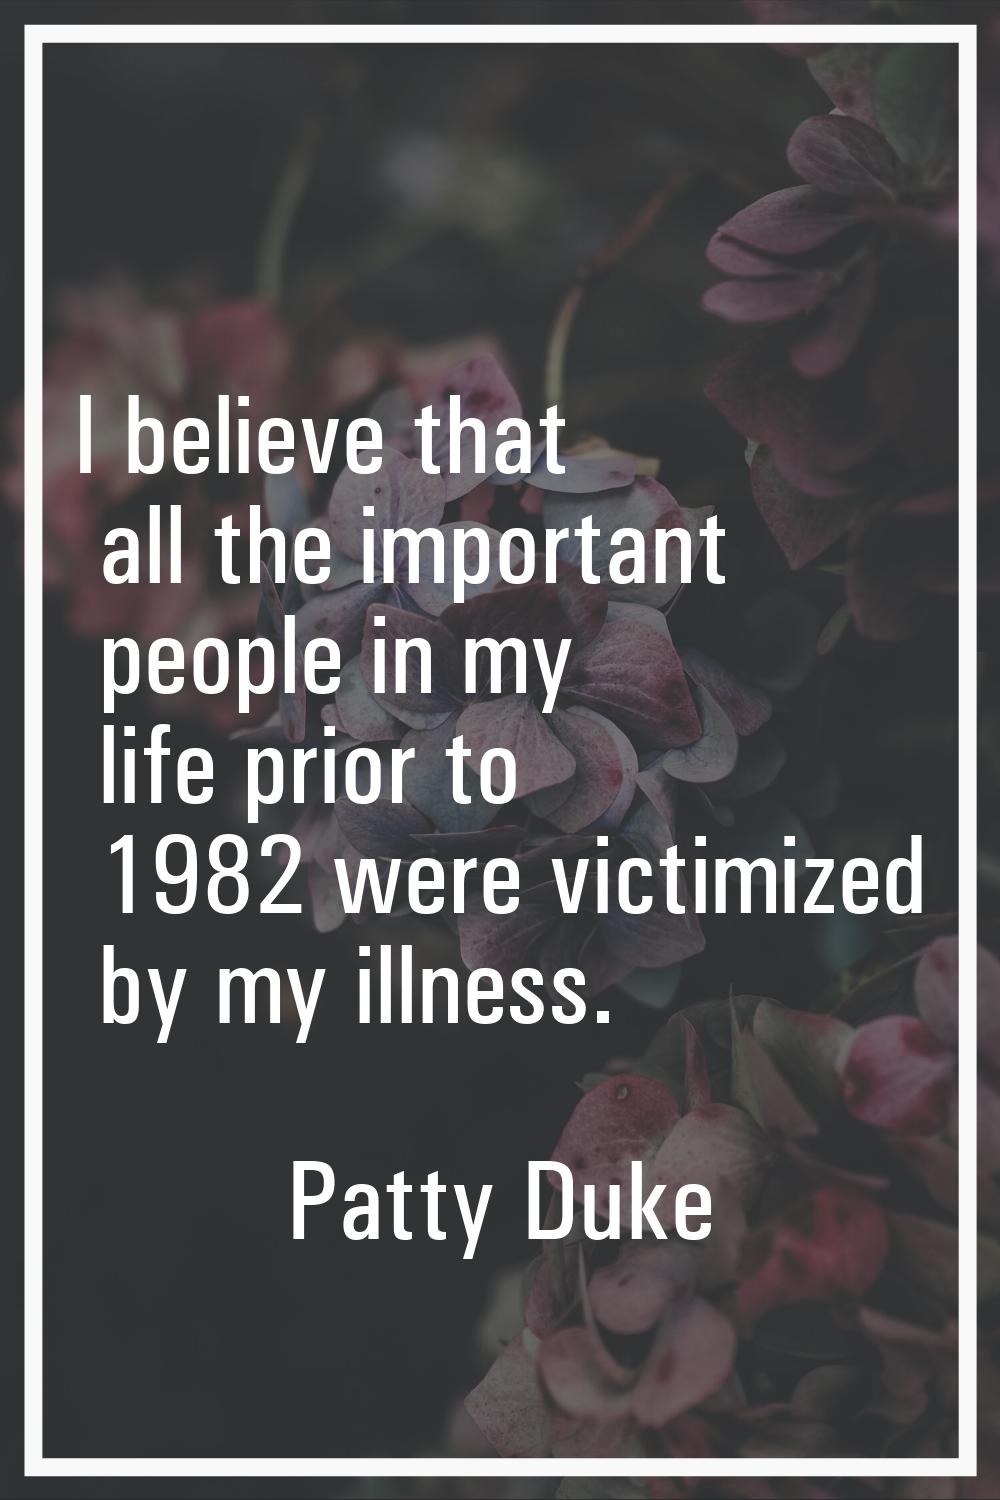 I believe that all the important people in my life prior to 1982 were victimized by my illness.